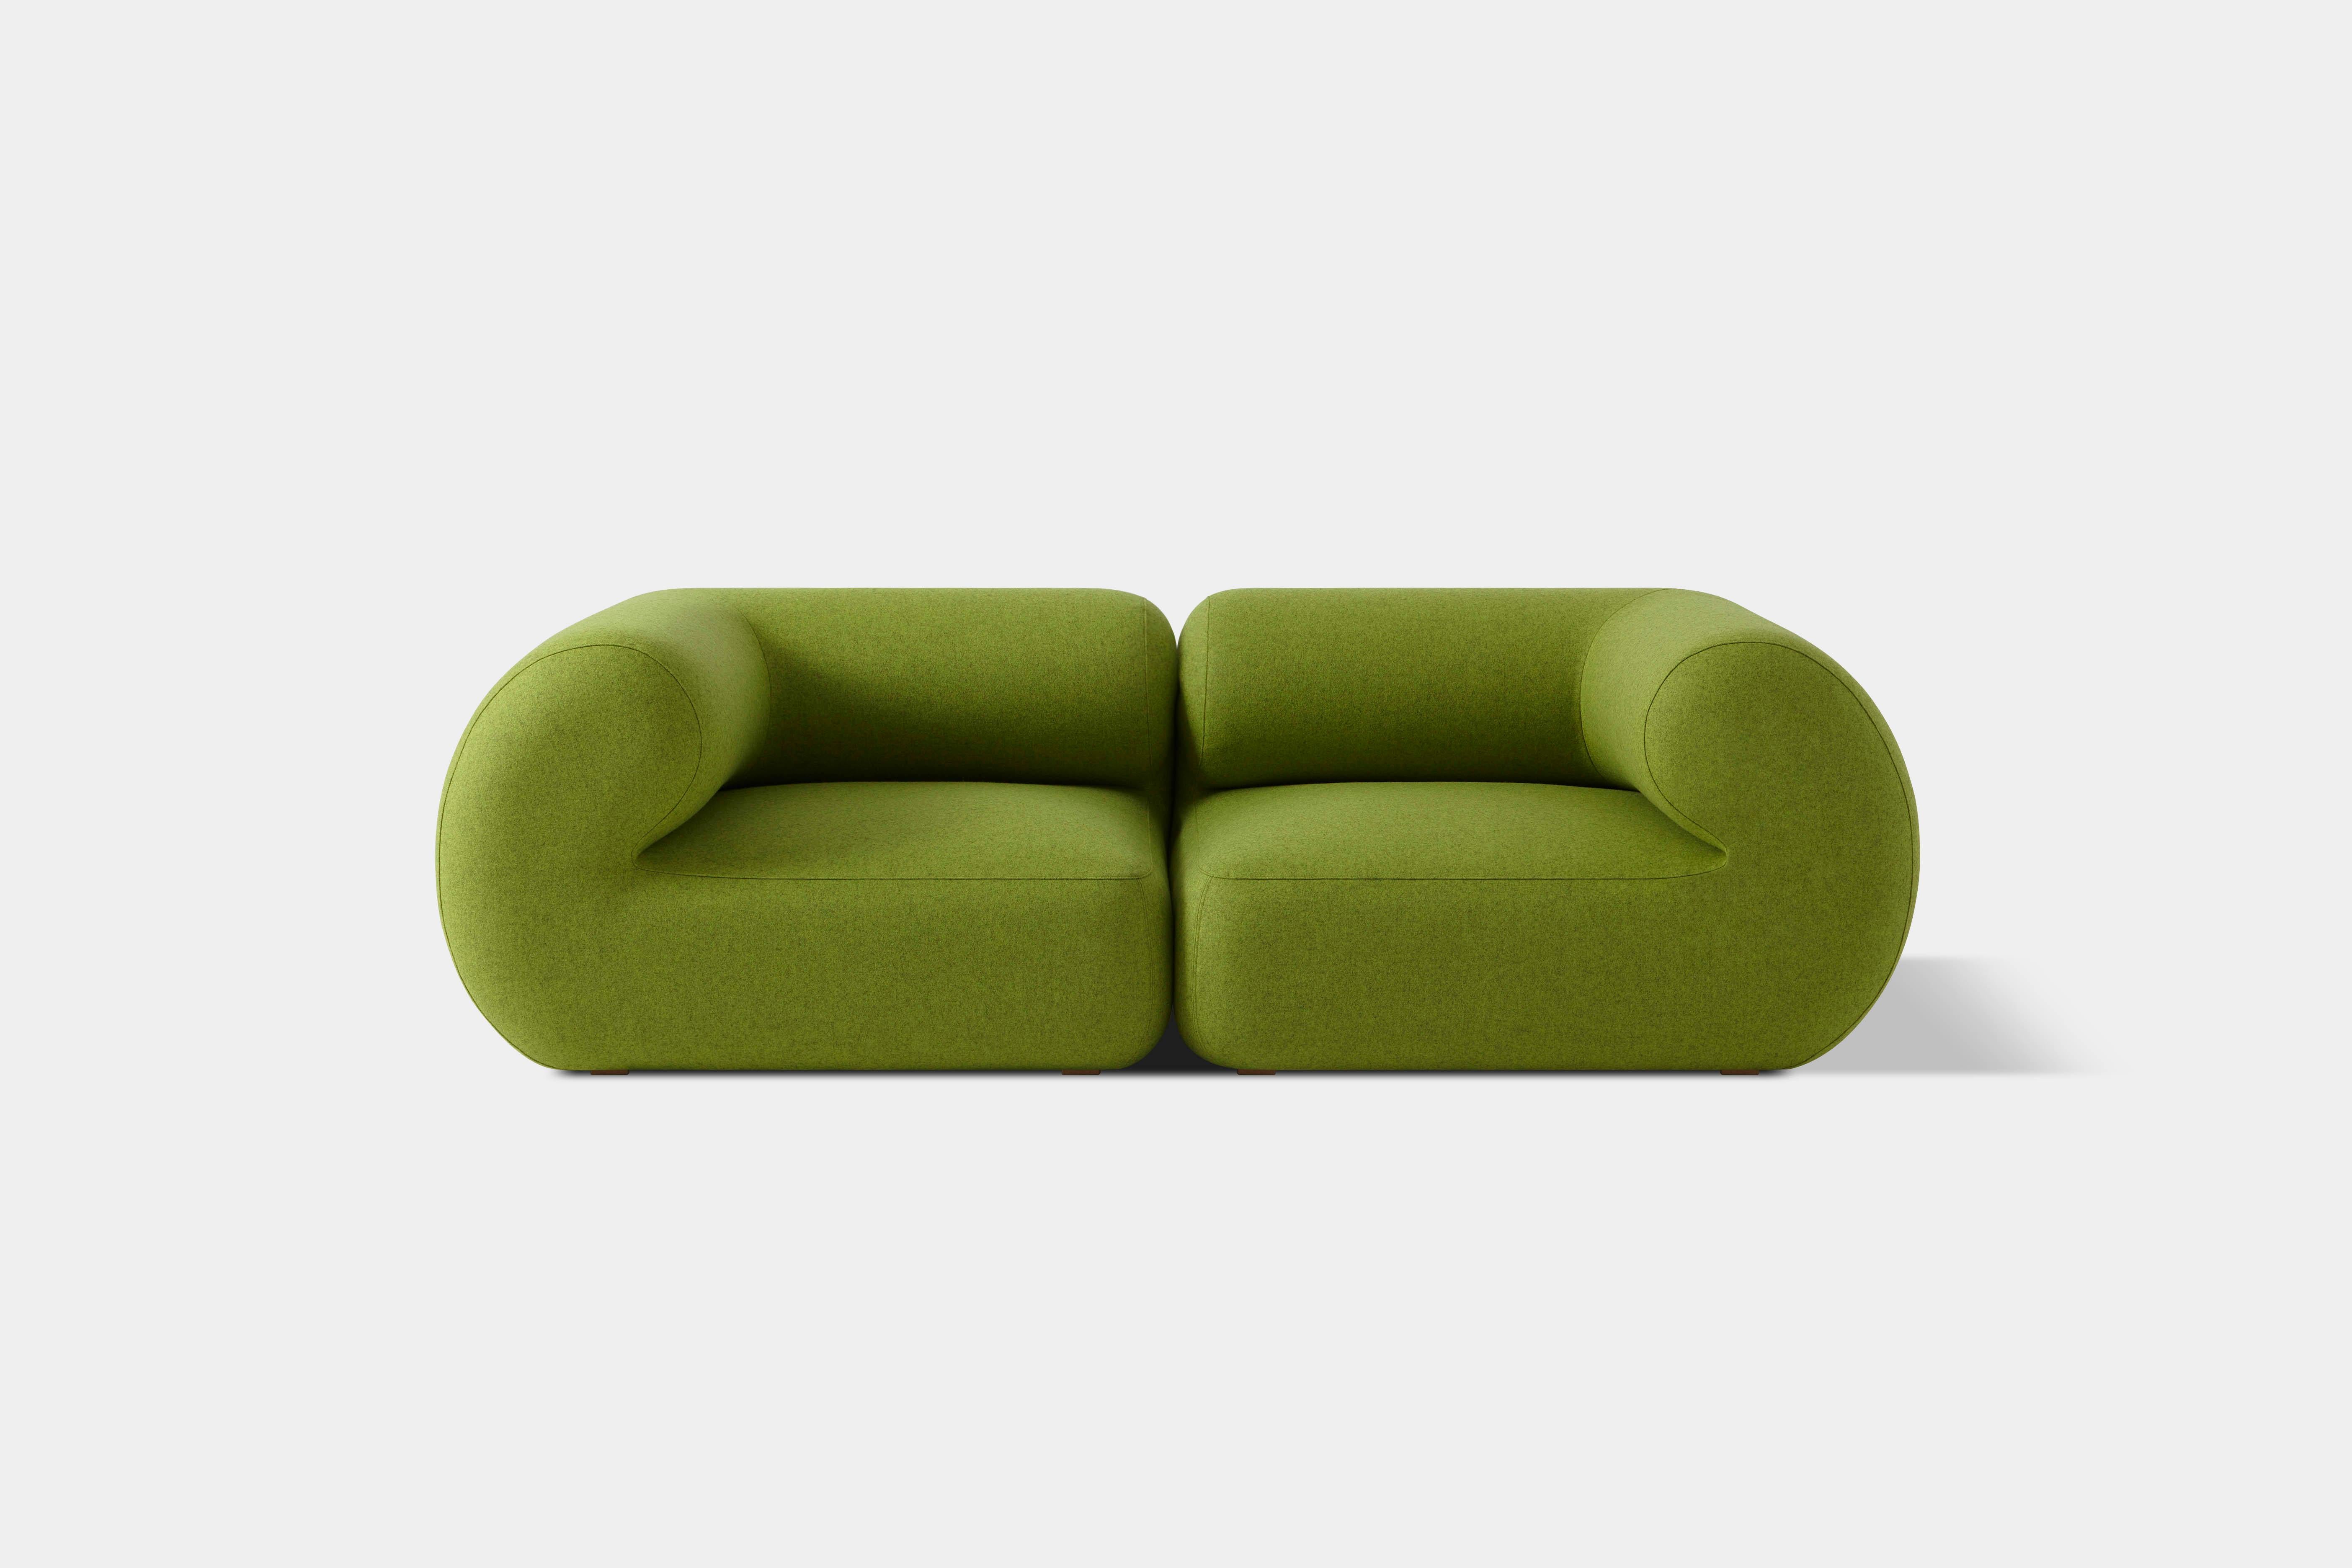 Green Set of 2 Michelin Corner Module by Pepe Albargues
Dimensions: W 103 x D 113 x H 71 cm
Materials: Pinewood, plywood and tablex structure.
Foam CMHR (high resilience and flame retardant) for all our cushion filling systems.
Lacquered beech wood